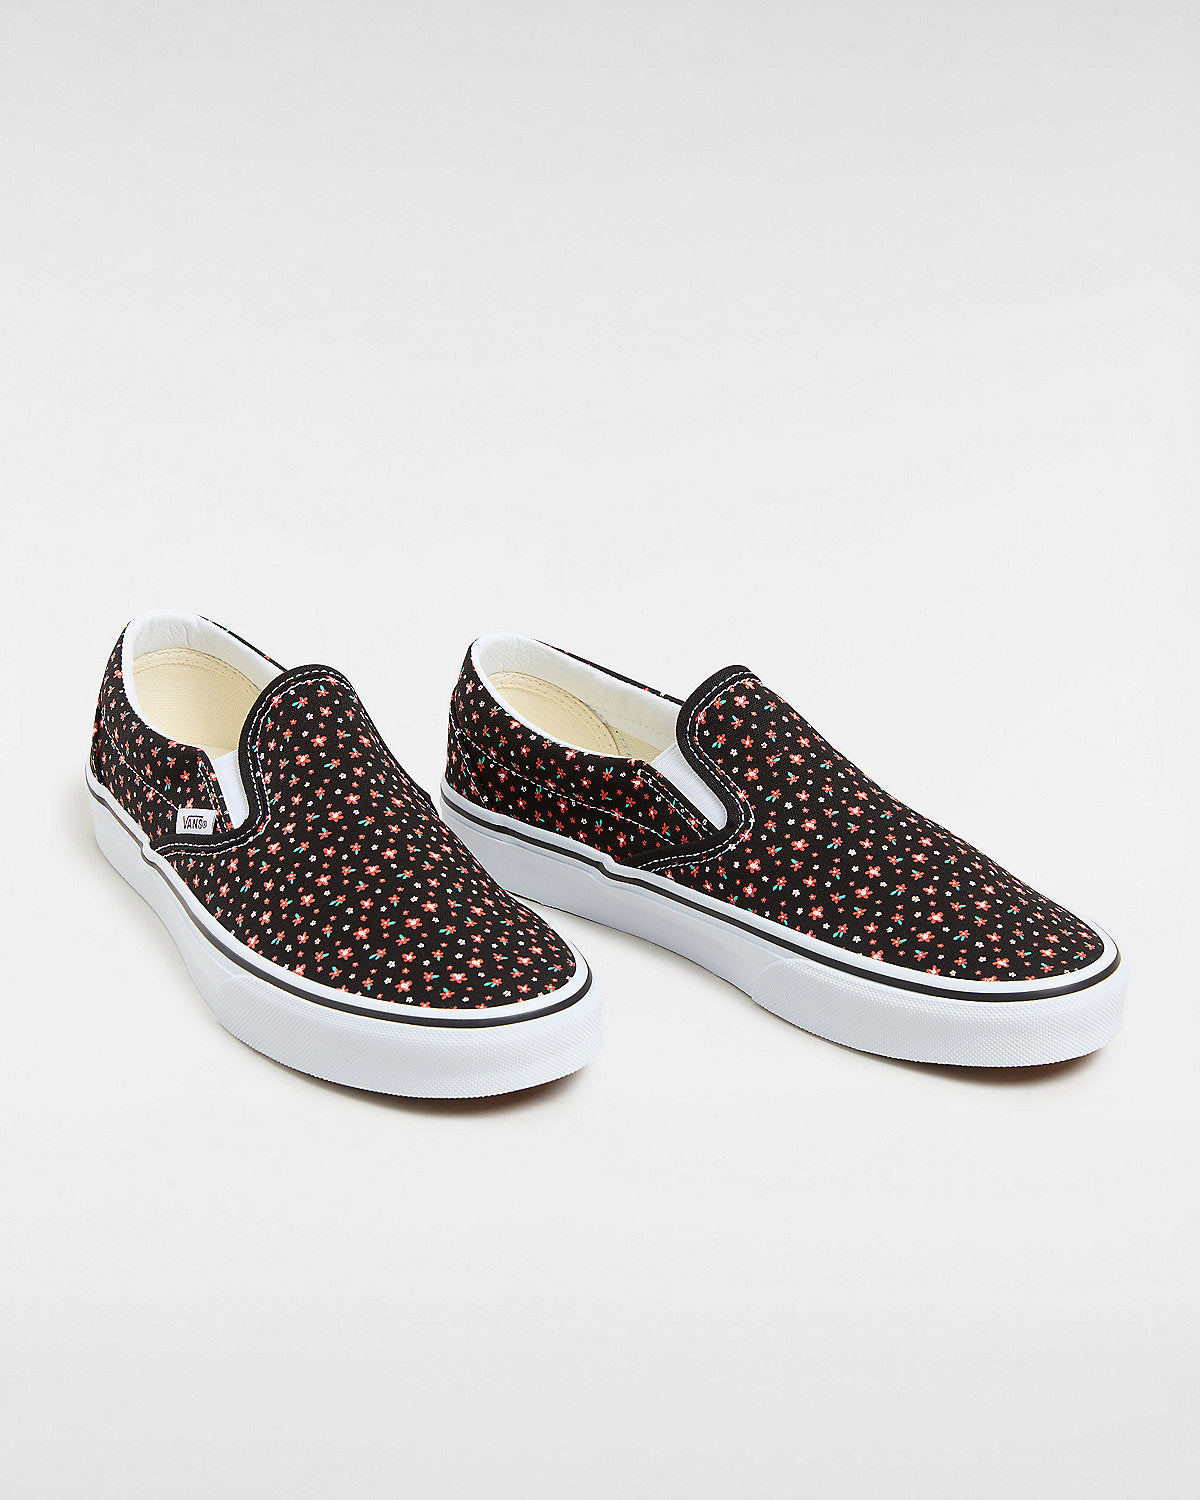 VANS Unisex Classic Ditsy Floral Slip-On Trainers - Black